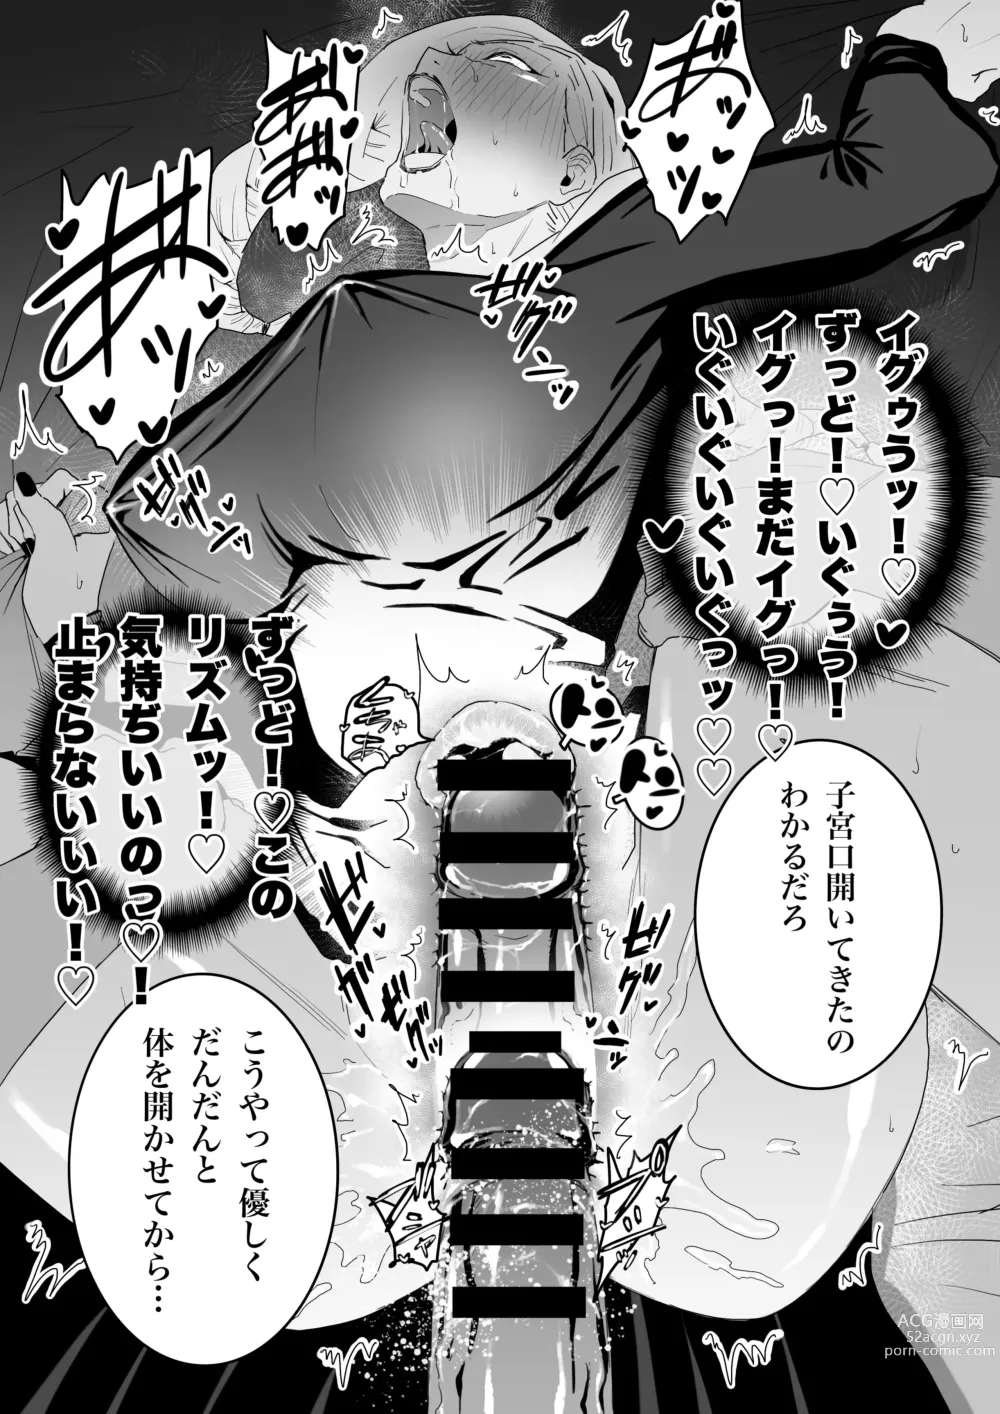 Page 10 of doujinshi The picked up Meimei just becomes a za*n tank.